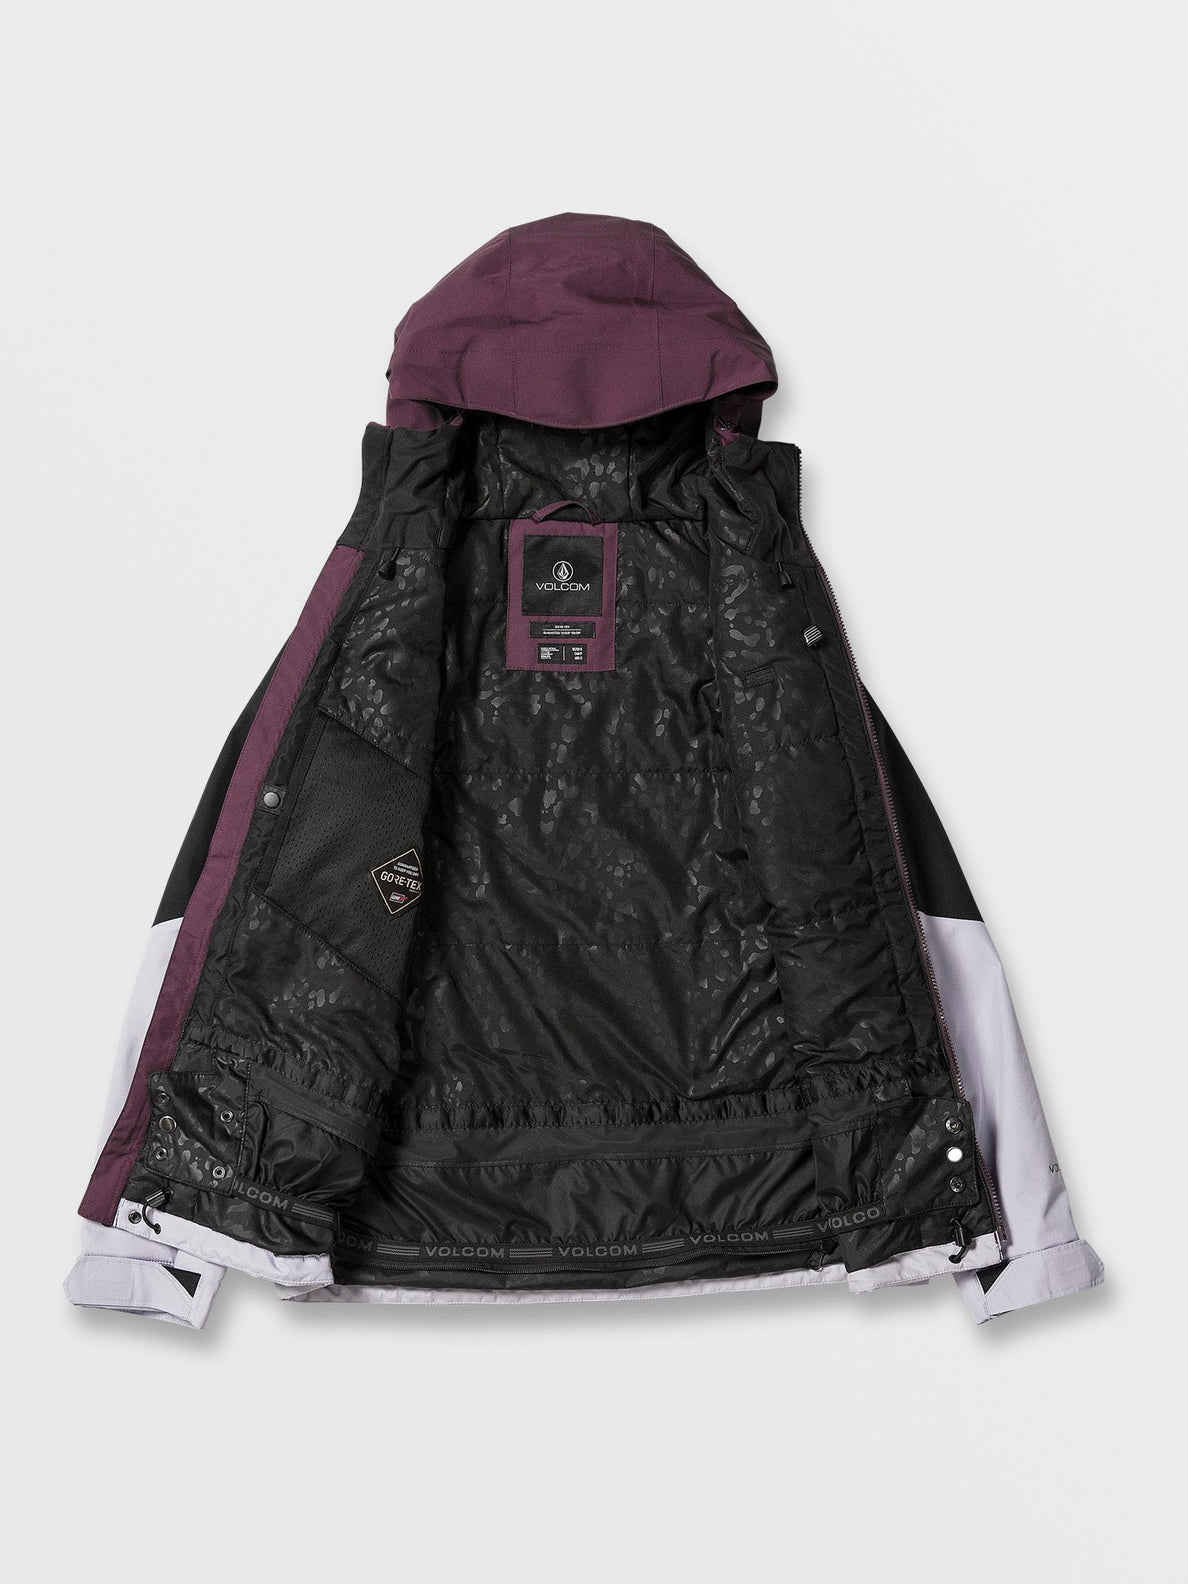 V.Co Aris Insulated Gore-Tex Jacket - BLACKBERRY (H0452405_BRY) [21]